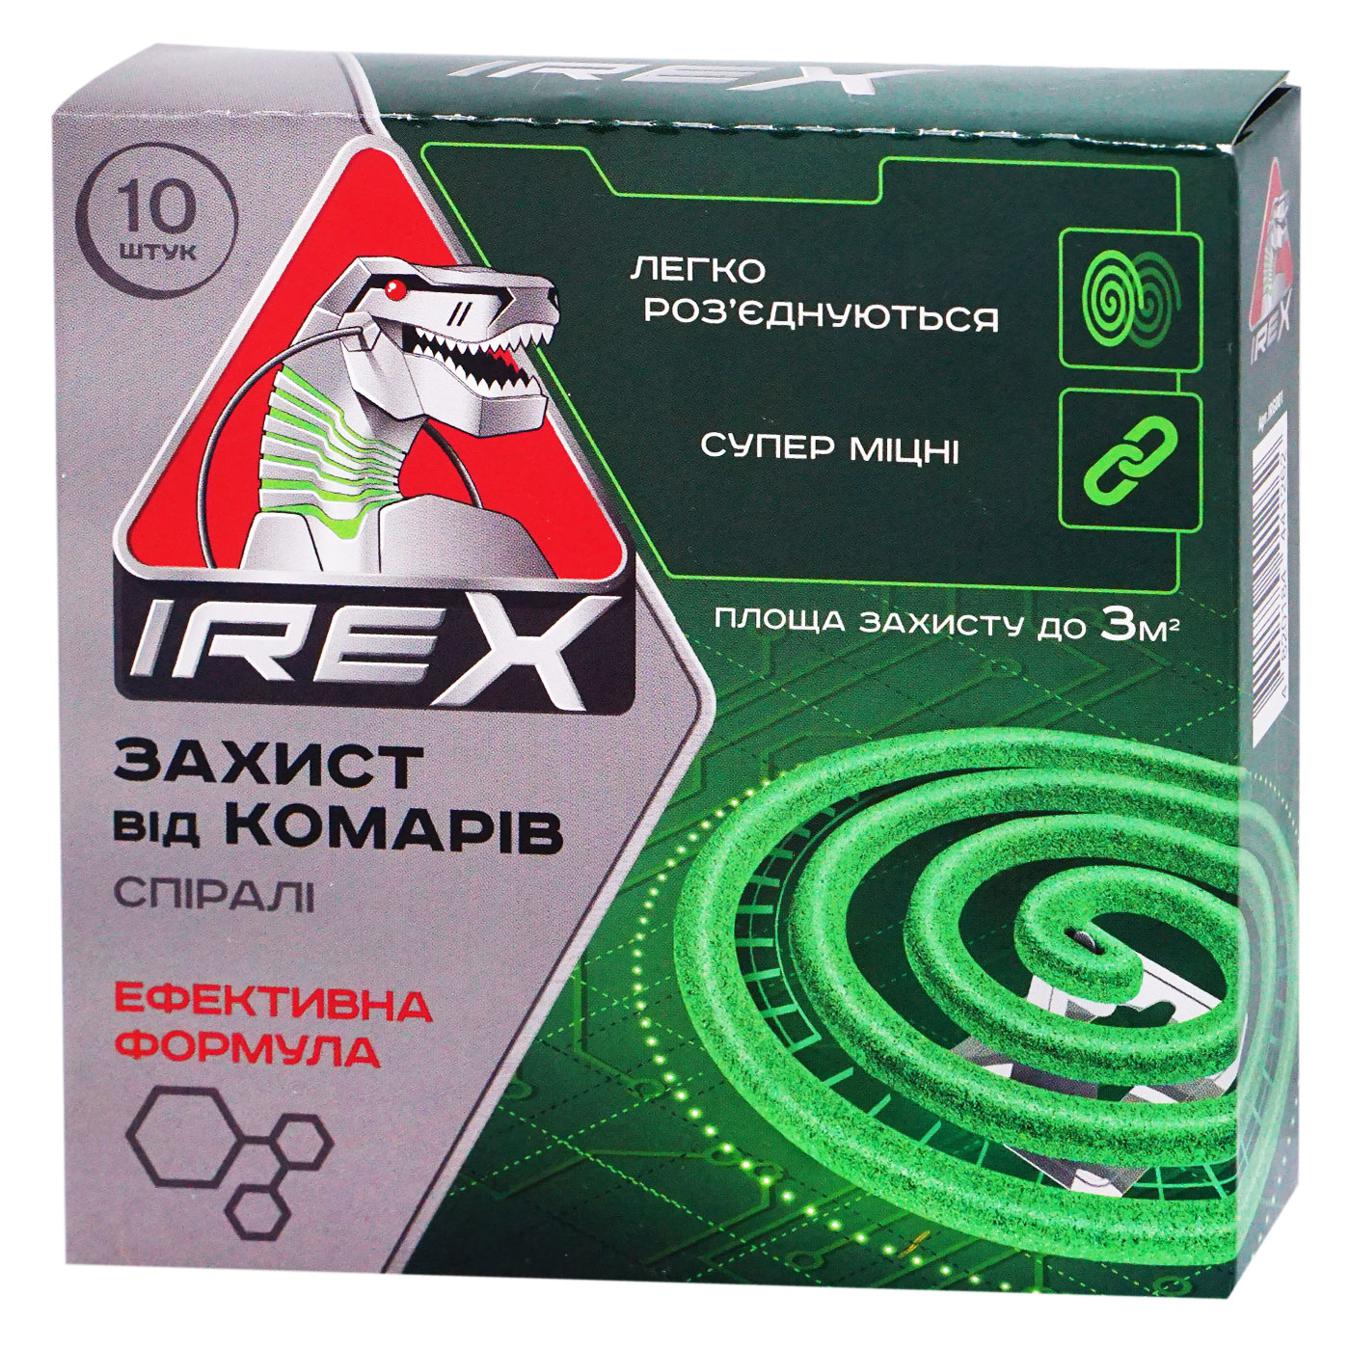 Spiral Irex against mosquitoes 10 pcs